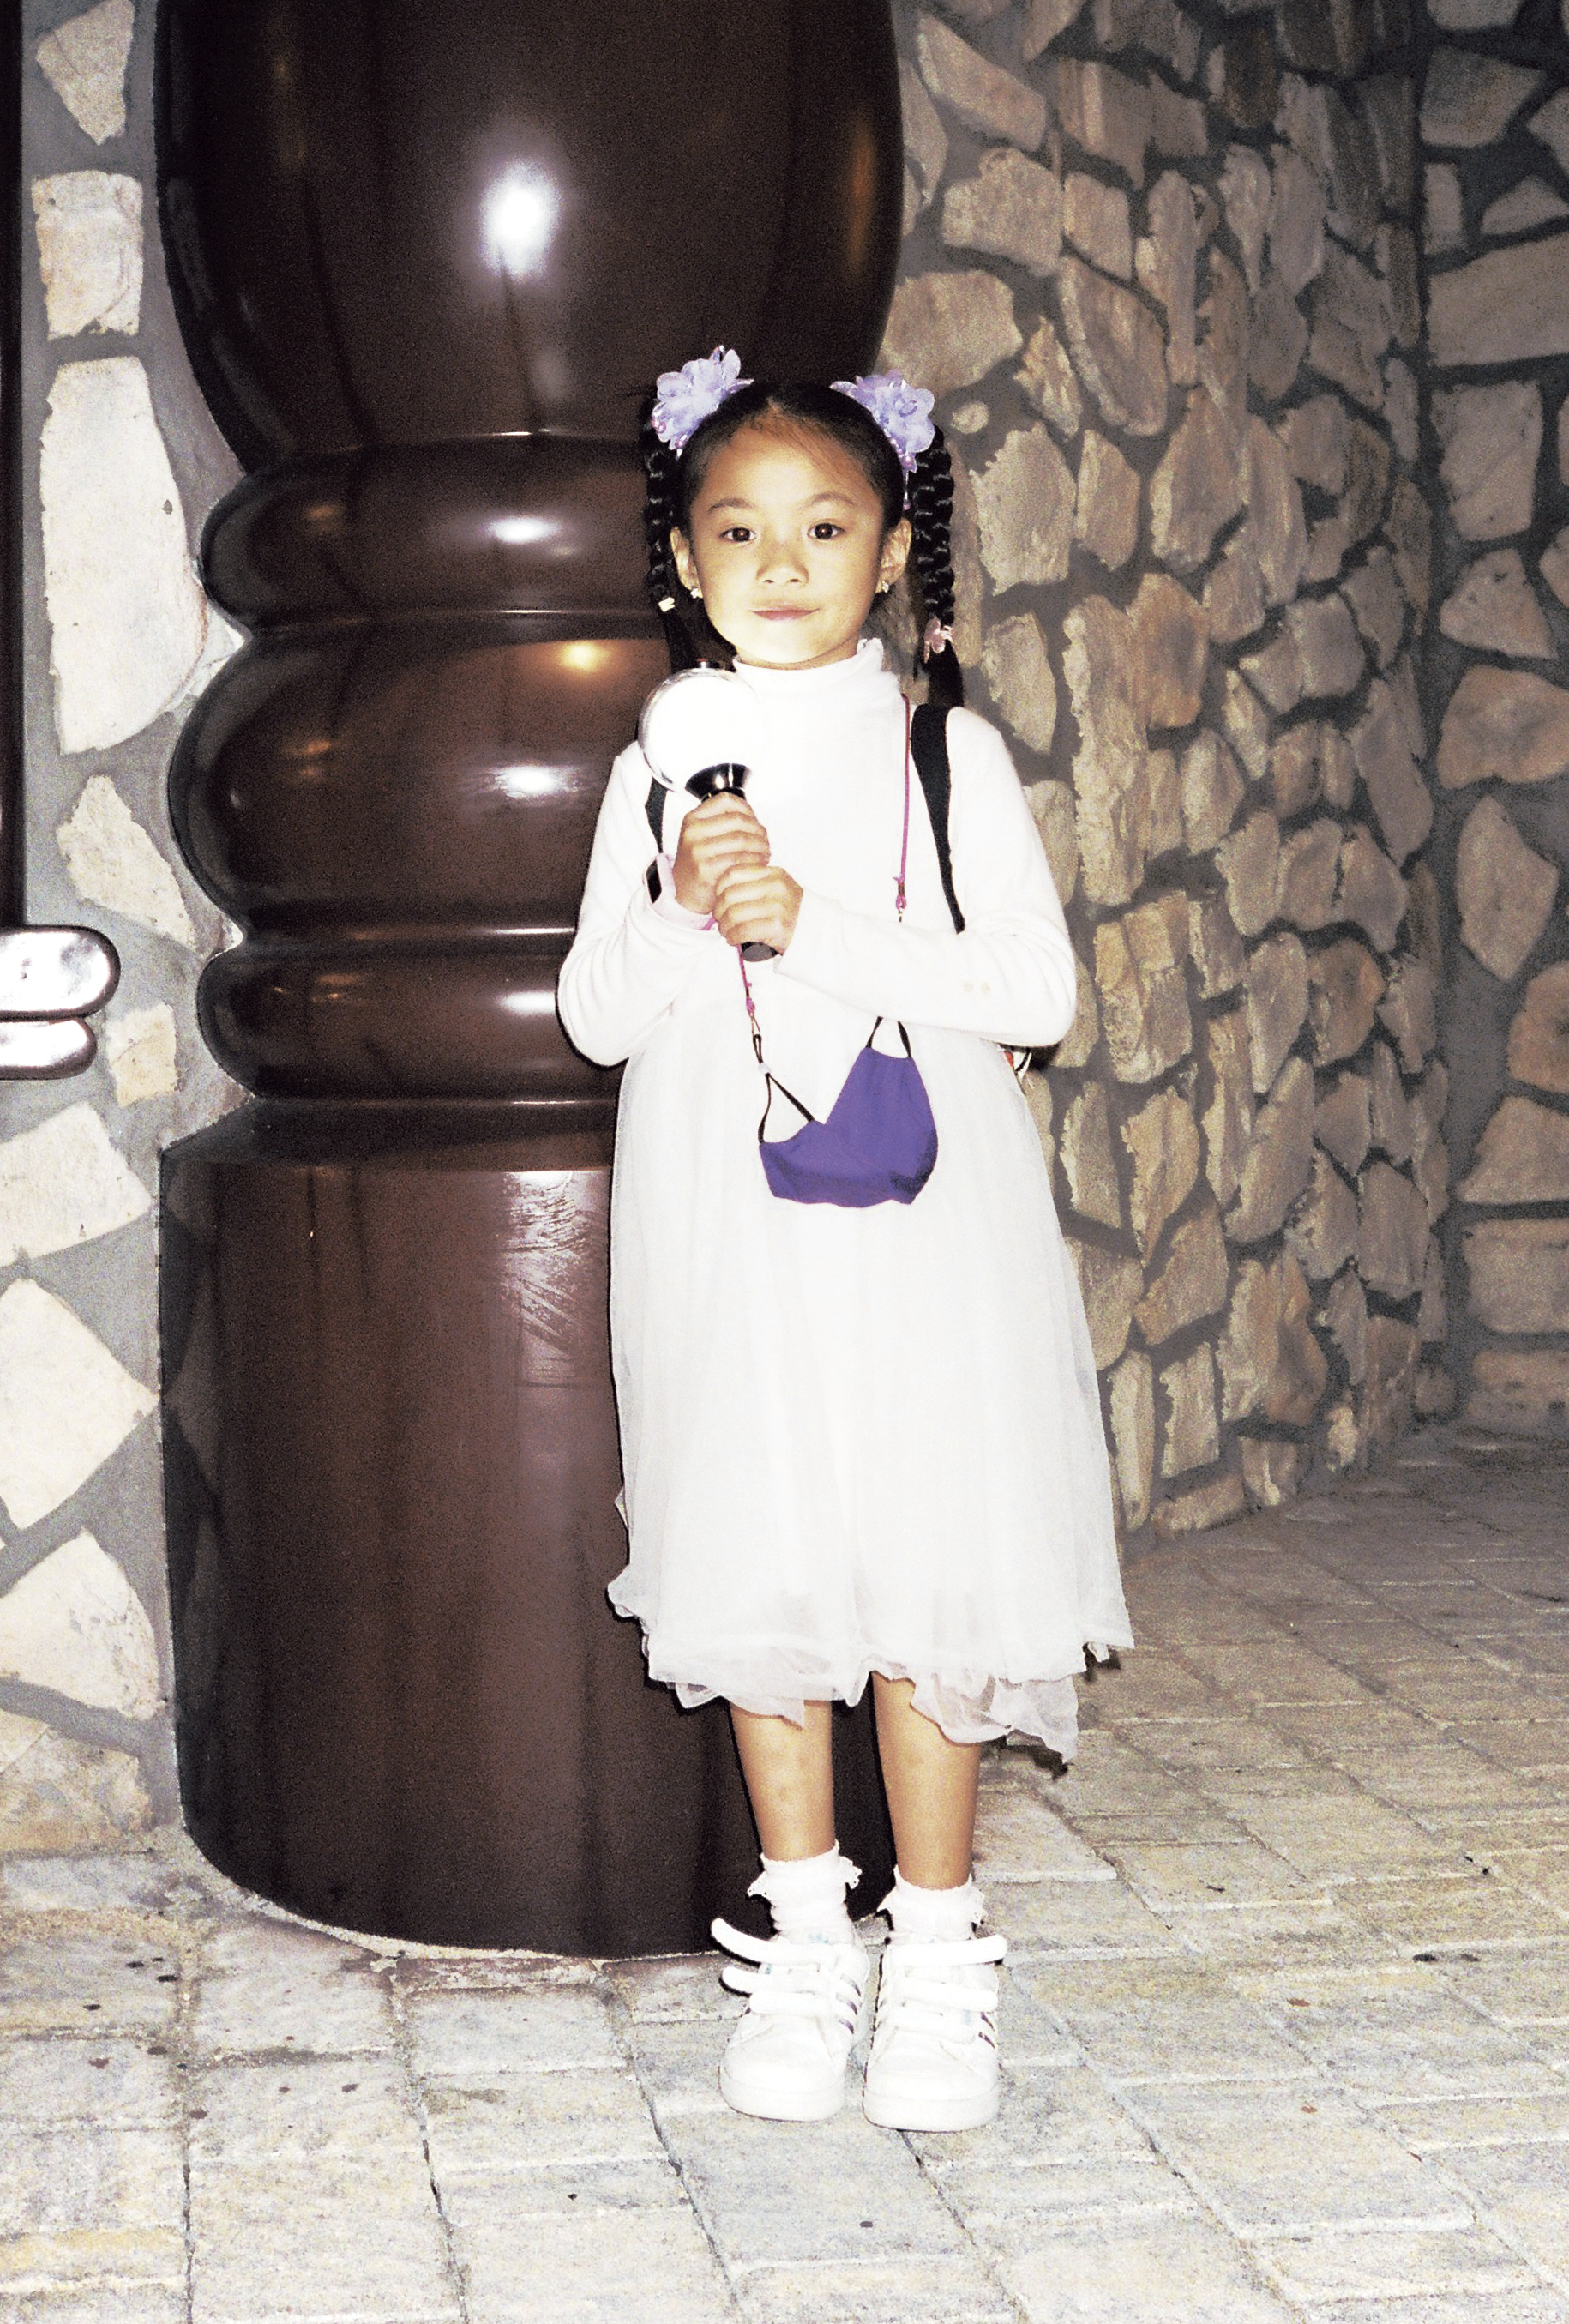 a young girl in a white dress and high pigtails clutches a light toy, a face mask hanging around her neck